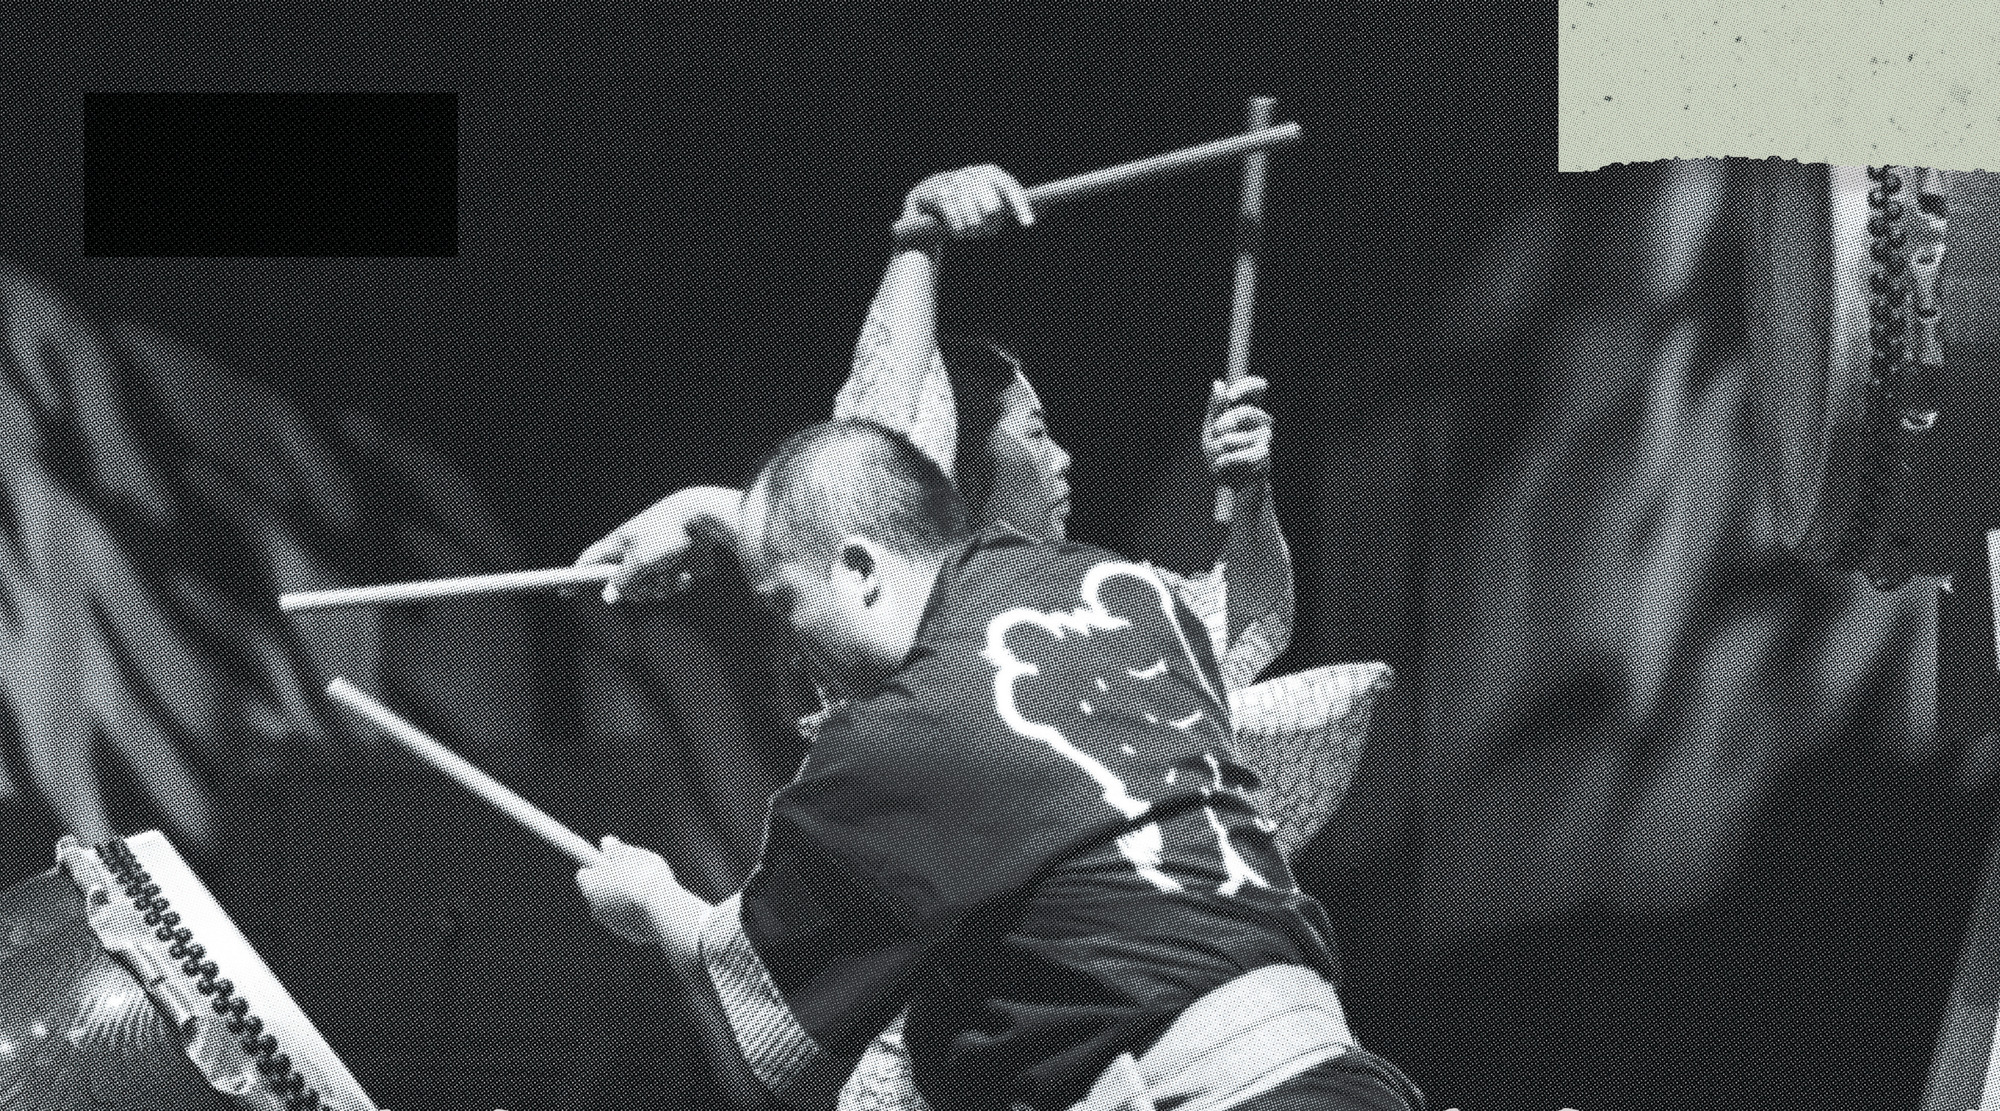 Michelle Fujii, co-founder of Unit Souzou, performs works honoring the history and roots of the taiko art form.